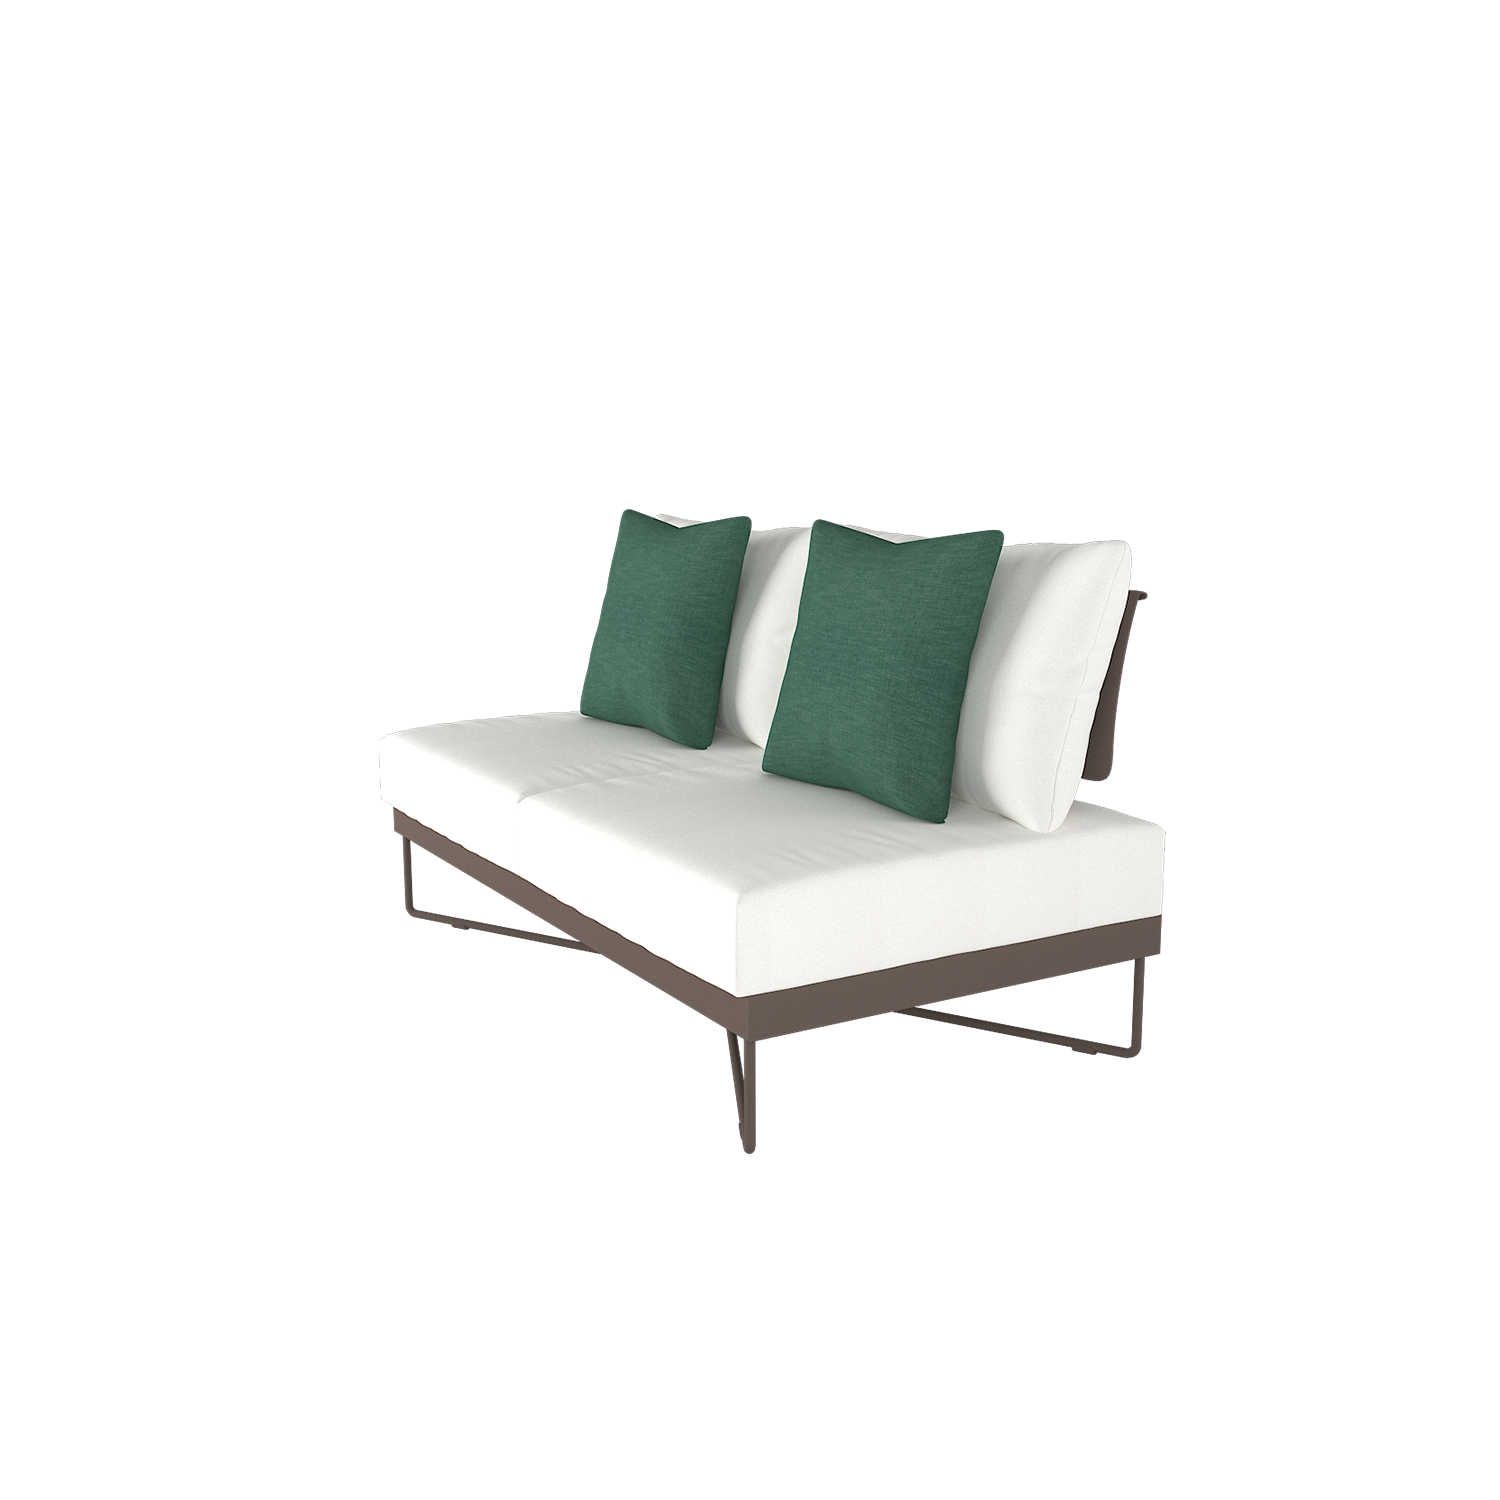 Coral Reef Outdoor Loveseat with Aluminum Back | Roberti | Outdoor Lounge chairs | coral-reef-outdoor-loveseat-2